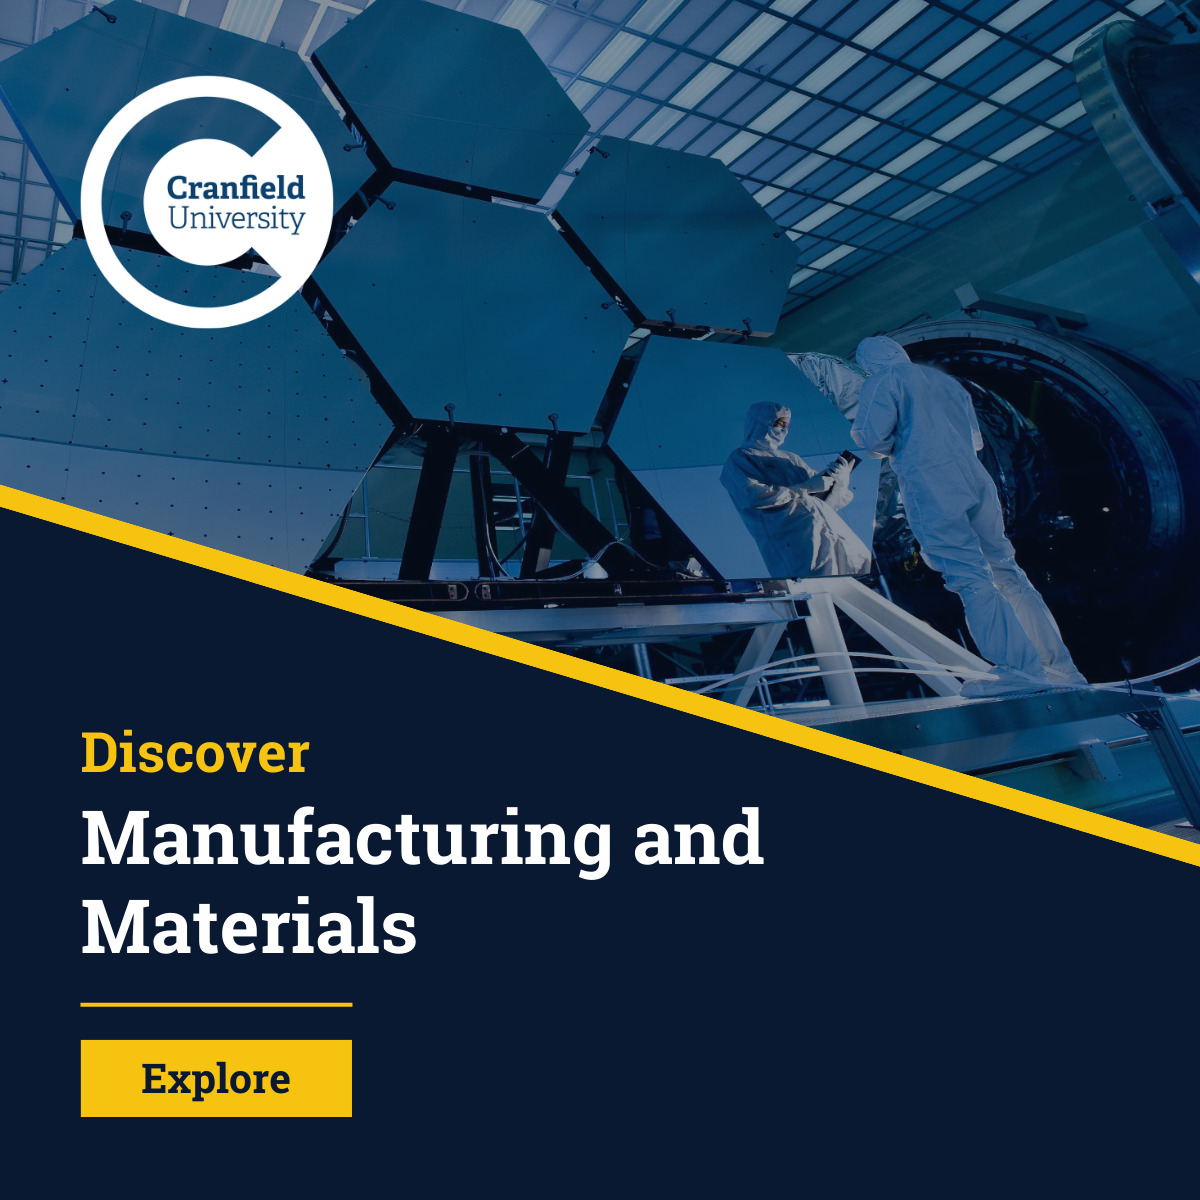 Discover manufacturing and materials at Cranfield